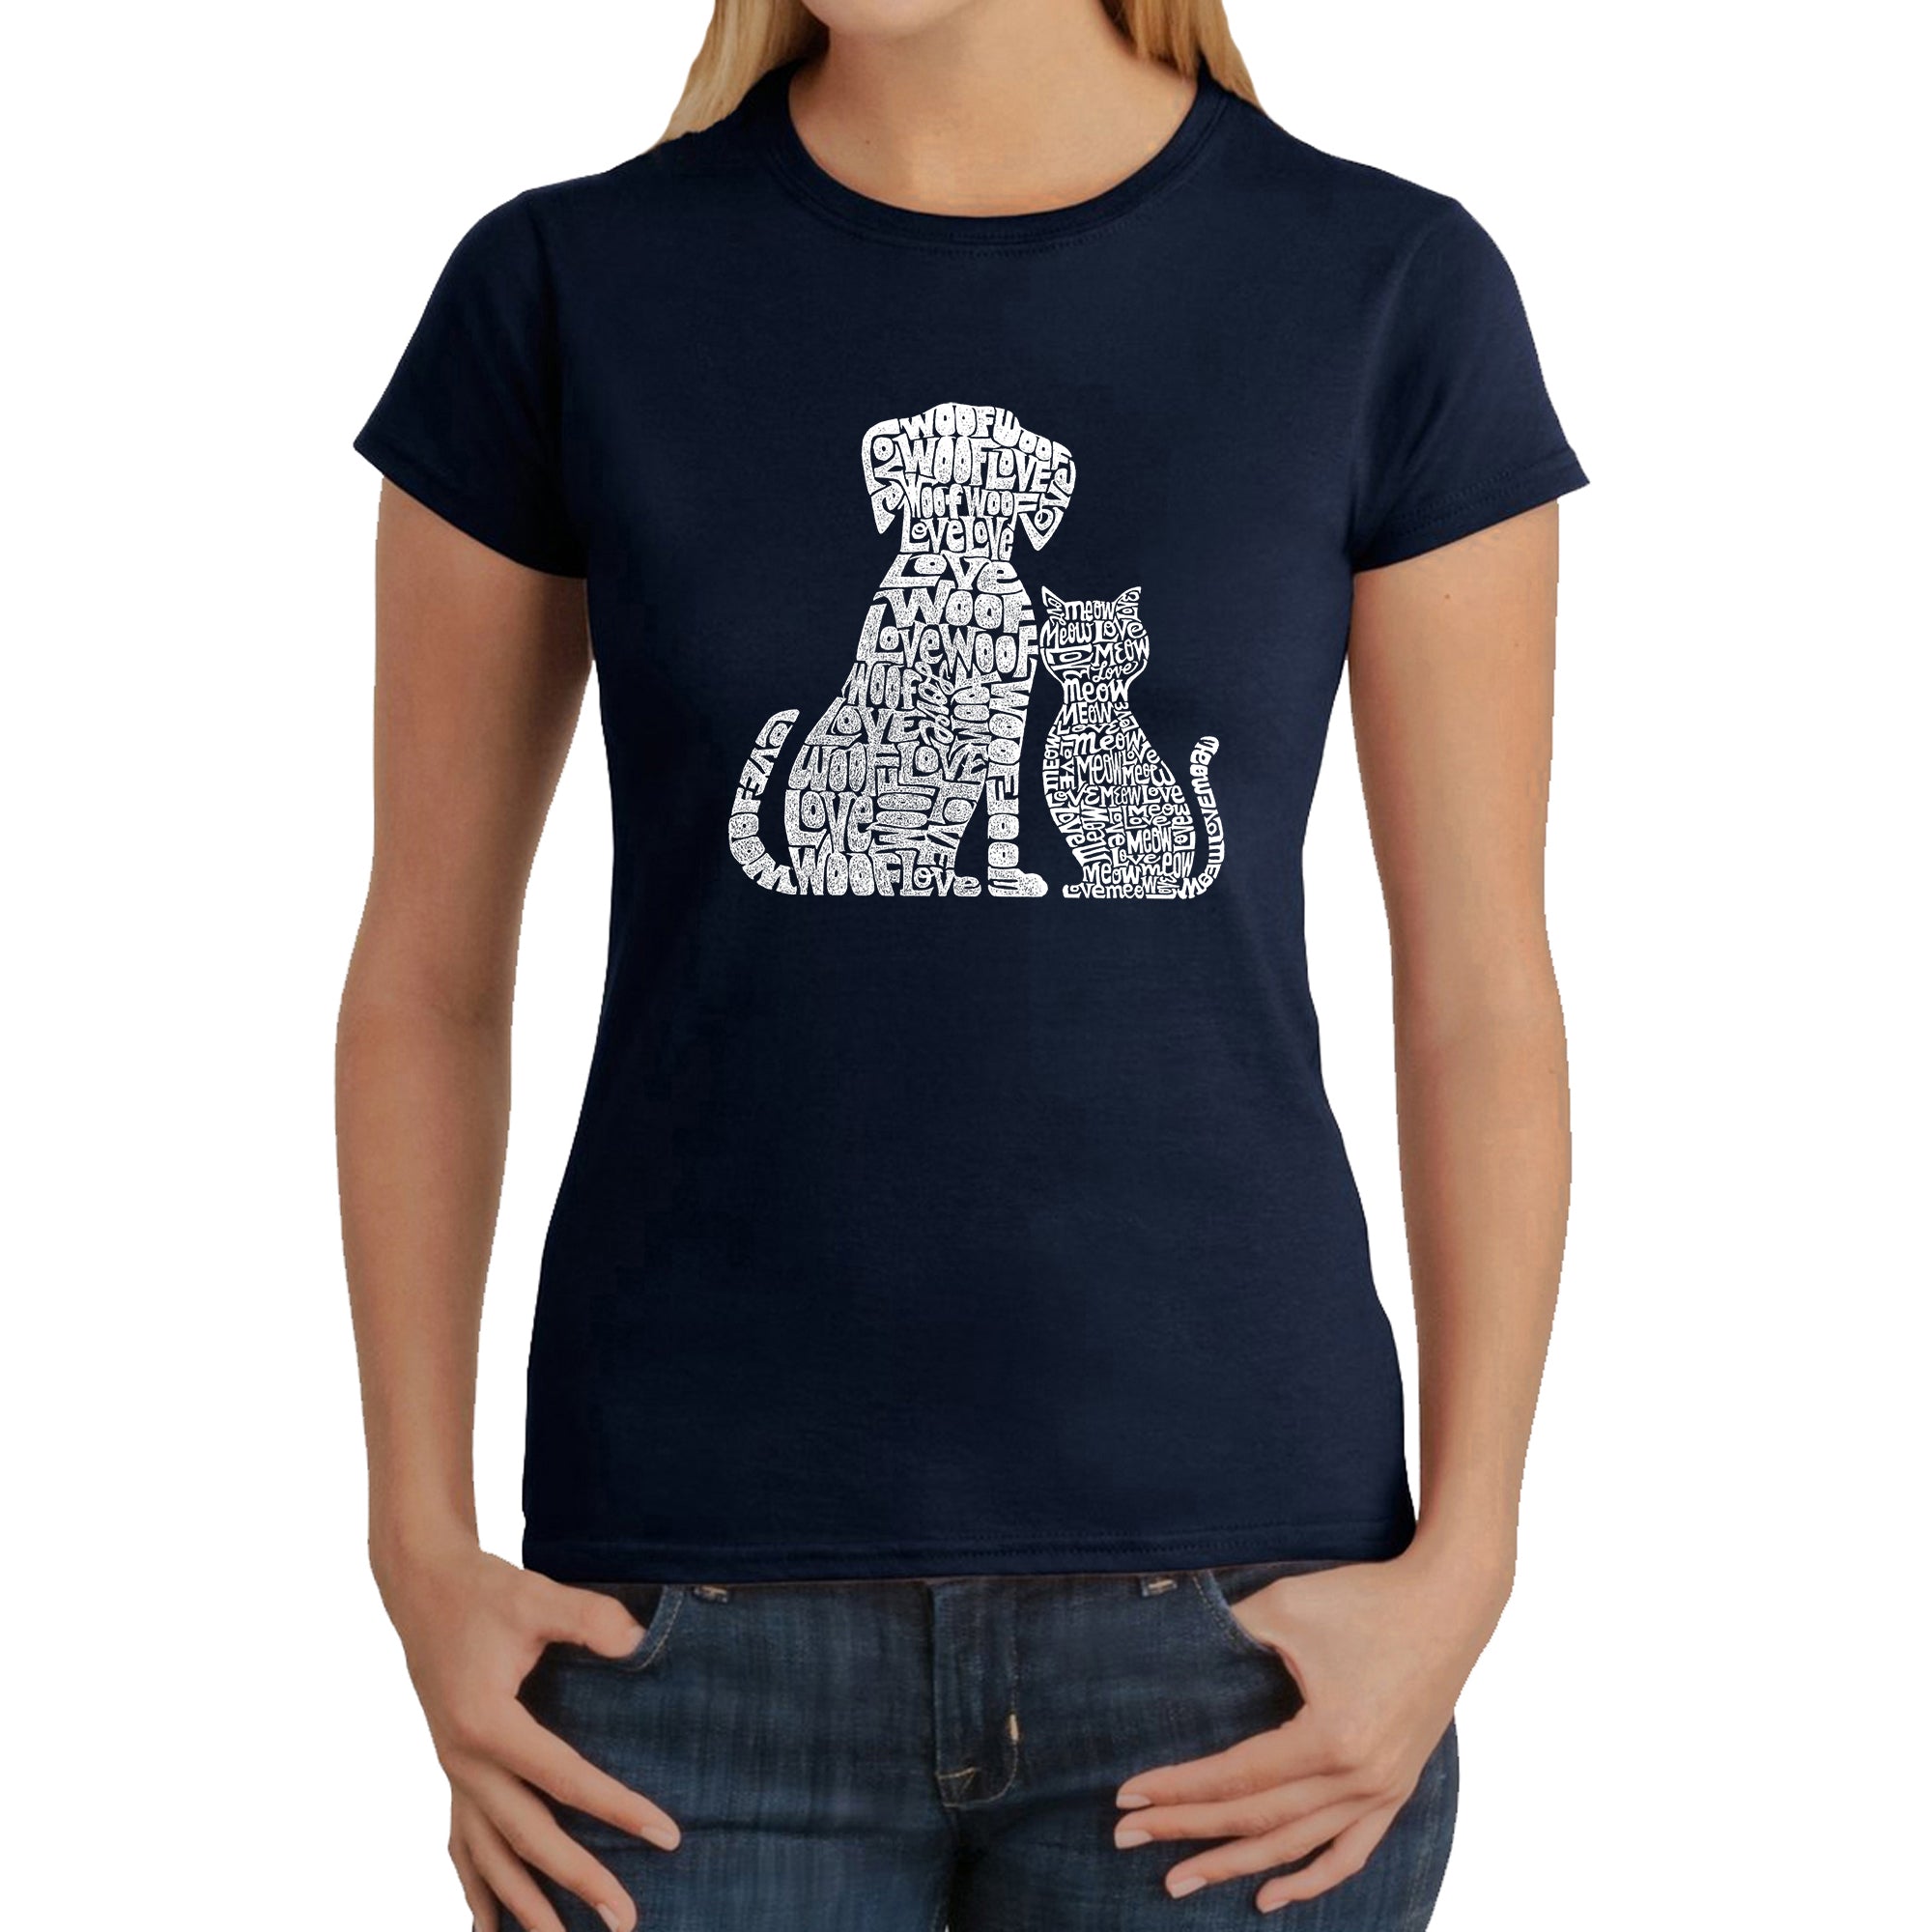 Dogs And Cats - Women's Word Art T-Shirt - Navy - X-Large